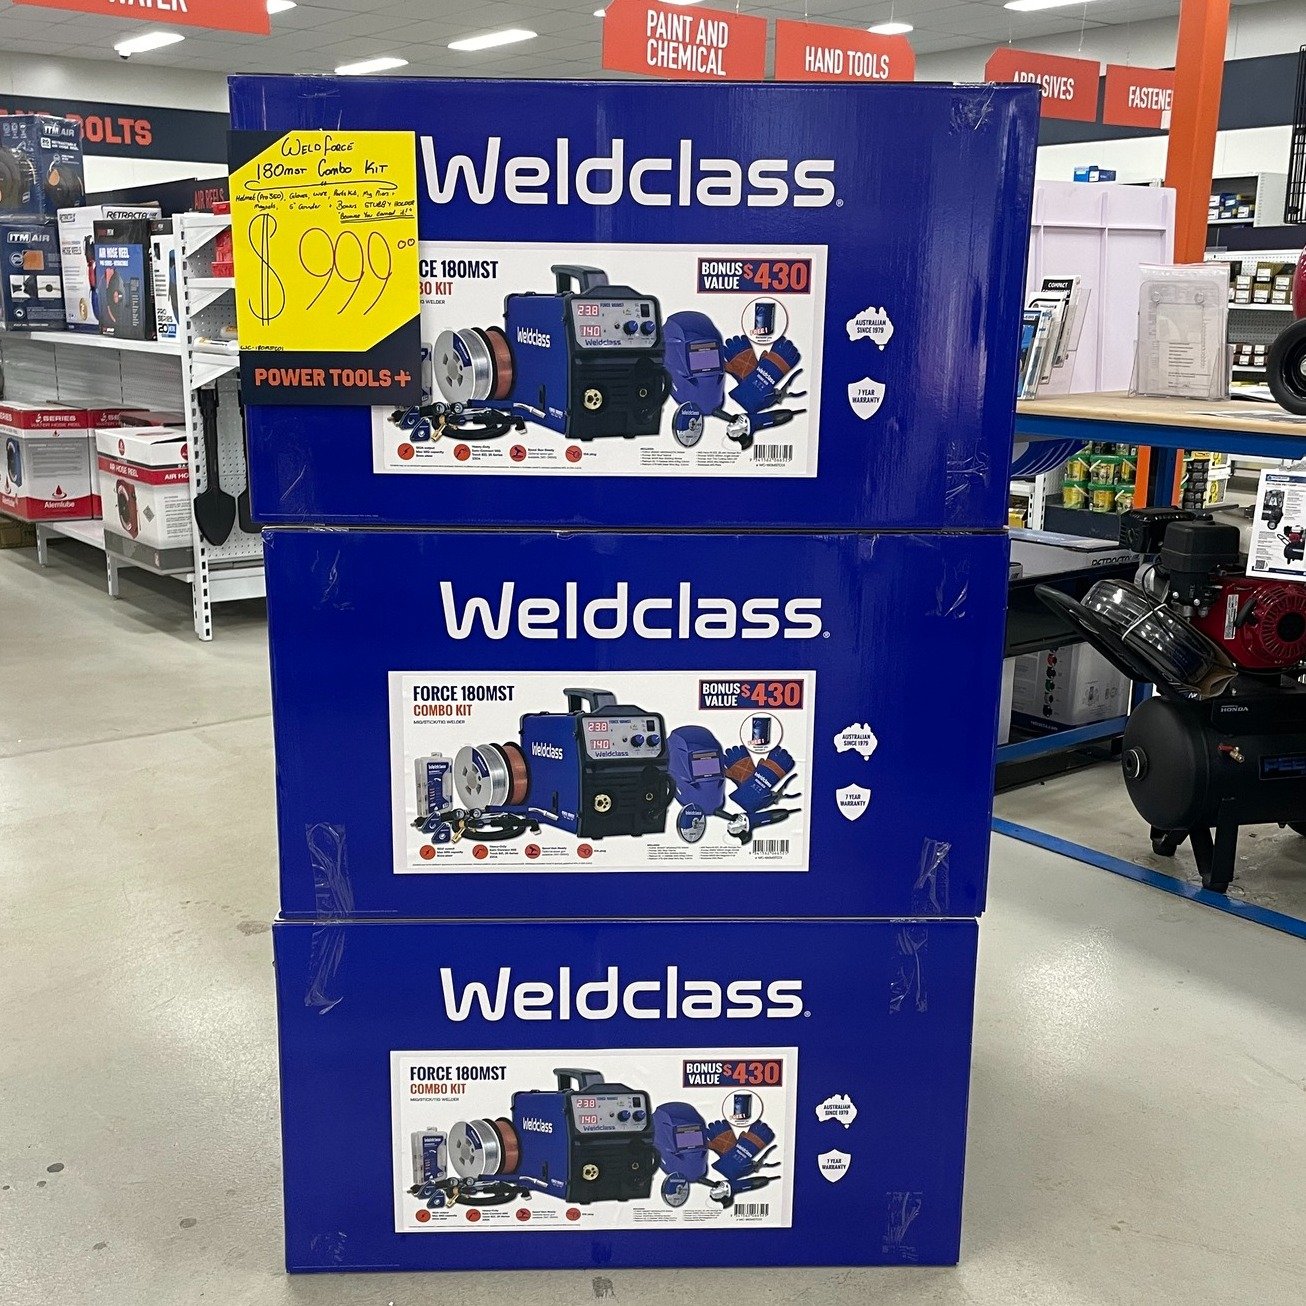 Here's a welding kit to spark your interest.

Weldclass 180MST Force Combo Kit (WC-180MSTC01) - now $990 until 30 June 2024. Featuring the Force 180MST Welder, plus $430 worth of products including Promax 350 helmet. angle grinder, platinum gasless w